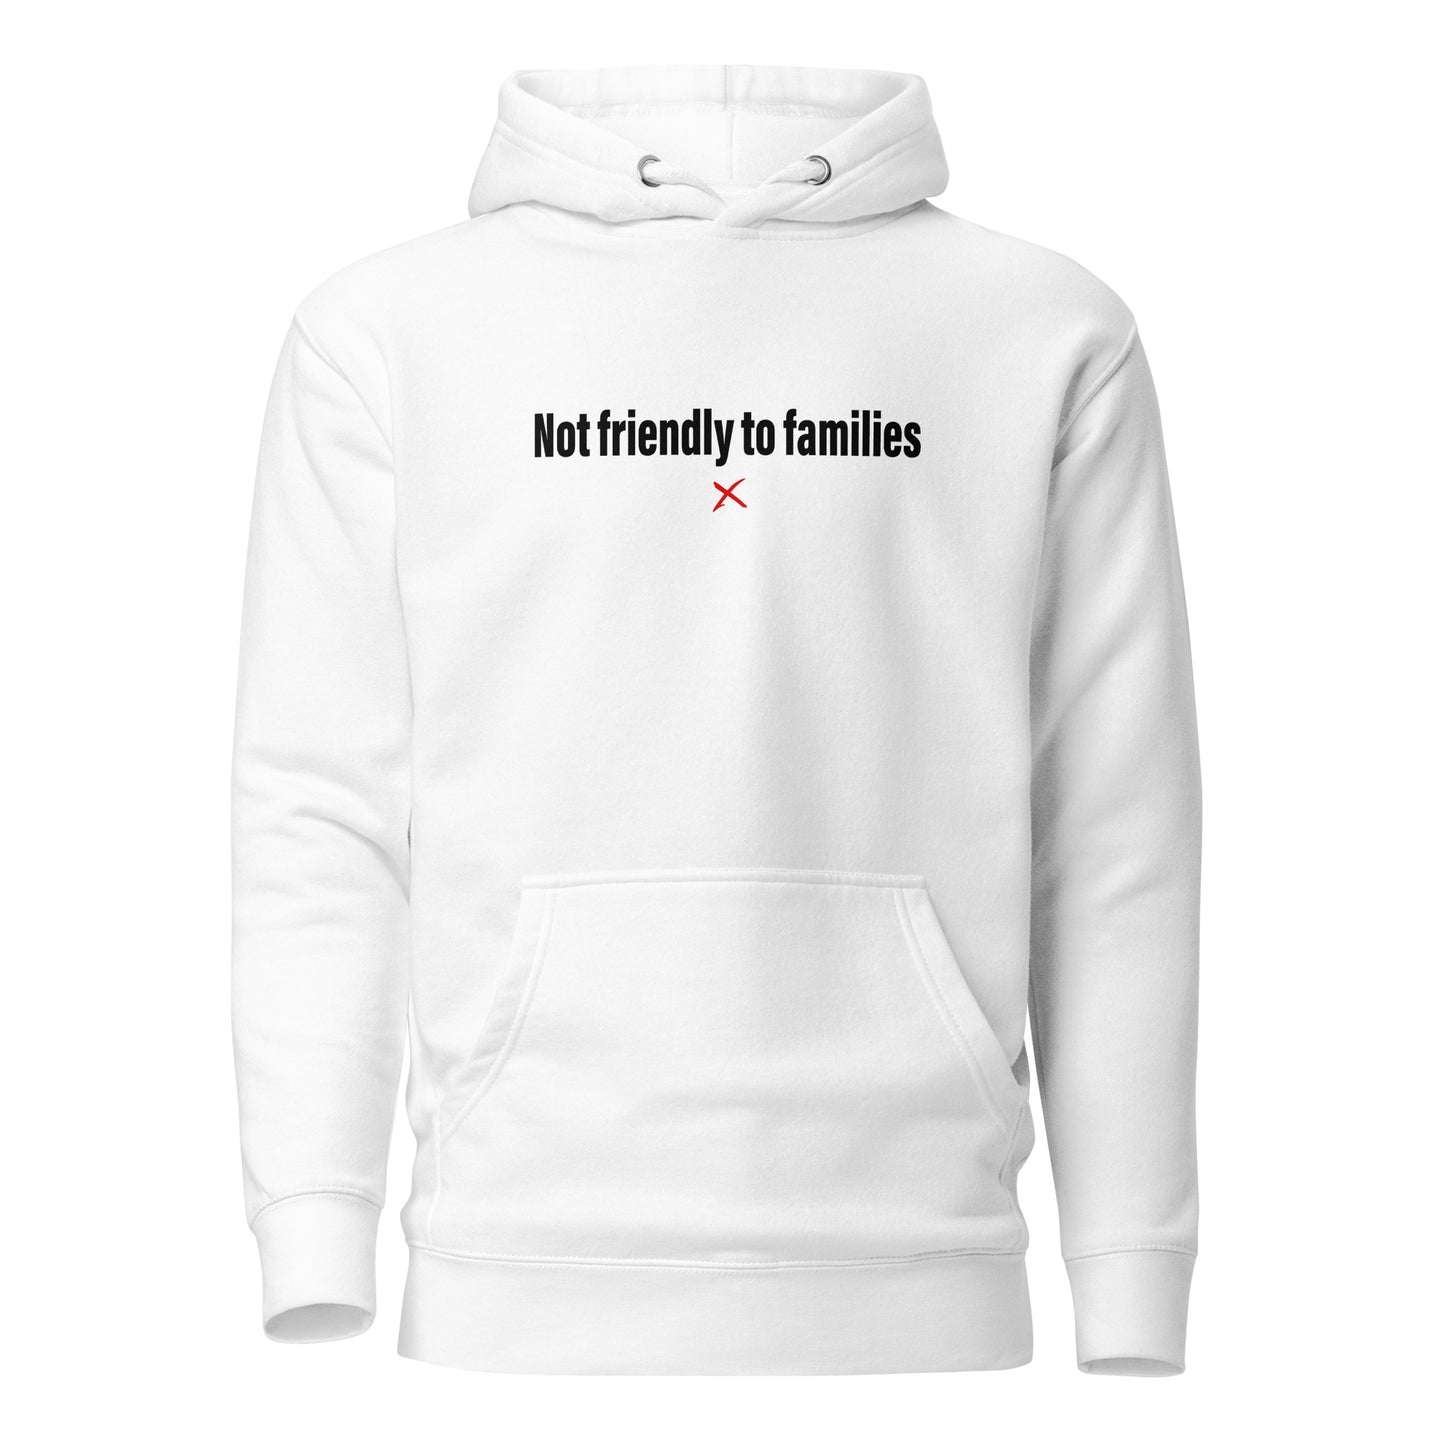 Not friendly to families - Hoodie